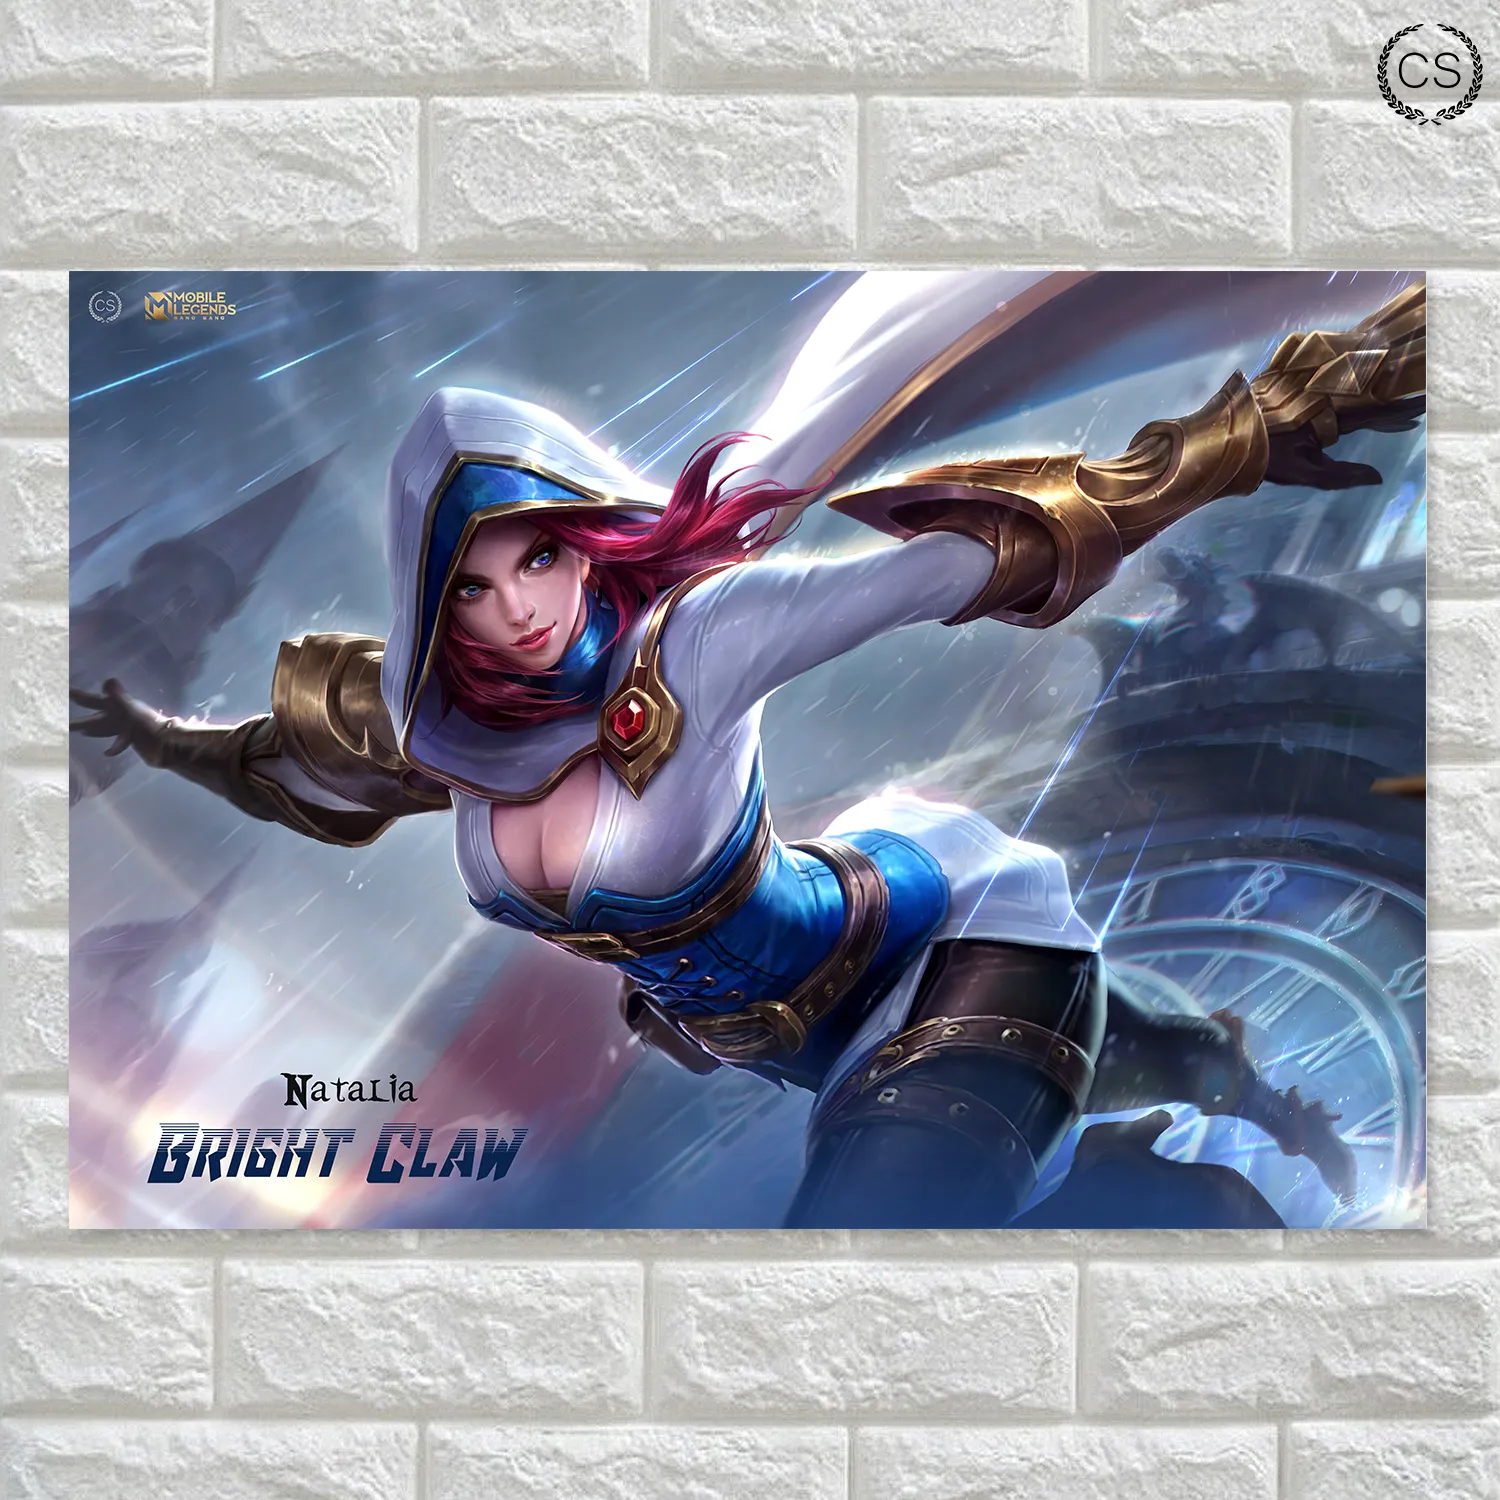 Natalia of Mobile Legends High Quality Poster Wall Décor A3 (30x42 cm) by  Crenson | Lazada PH